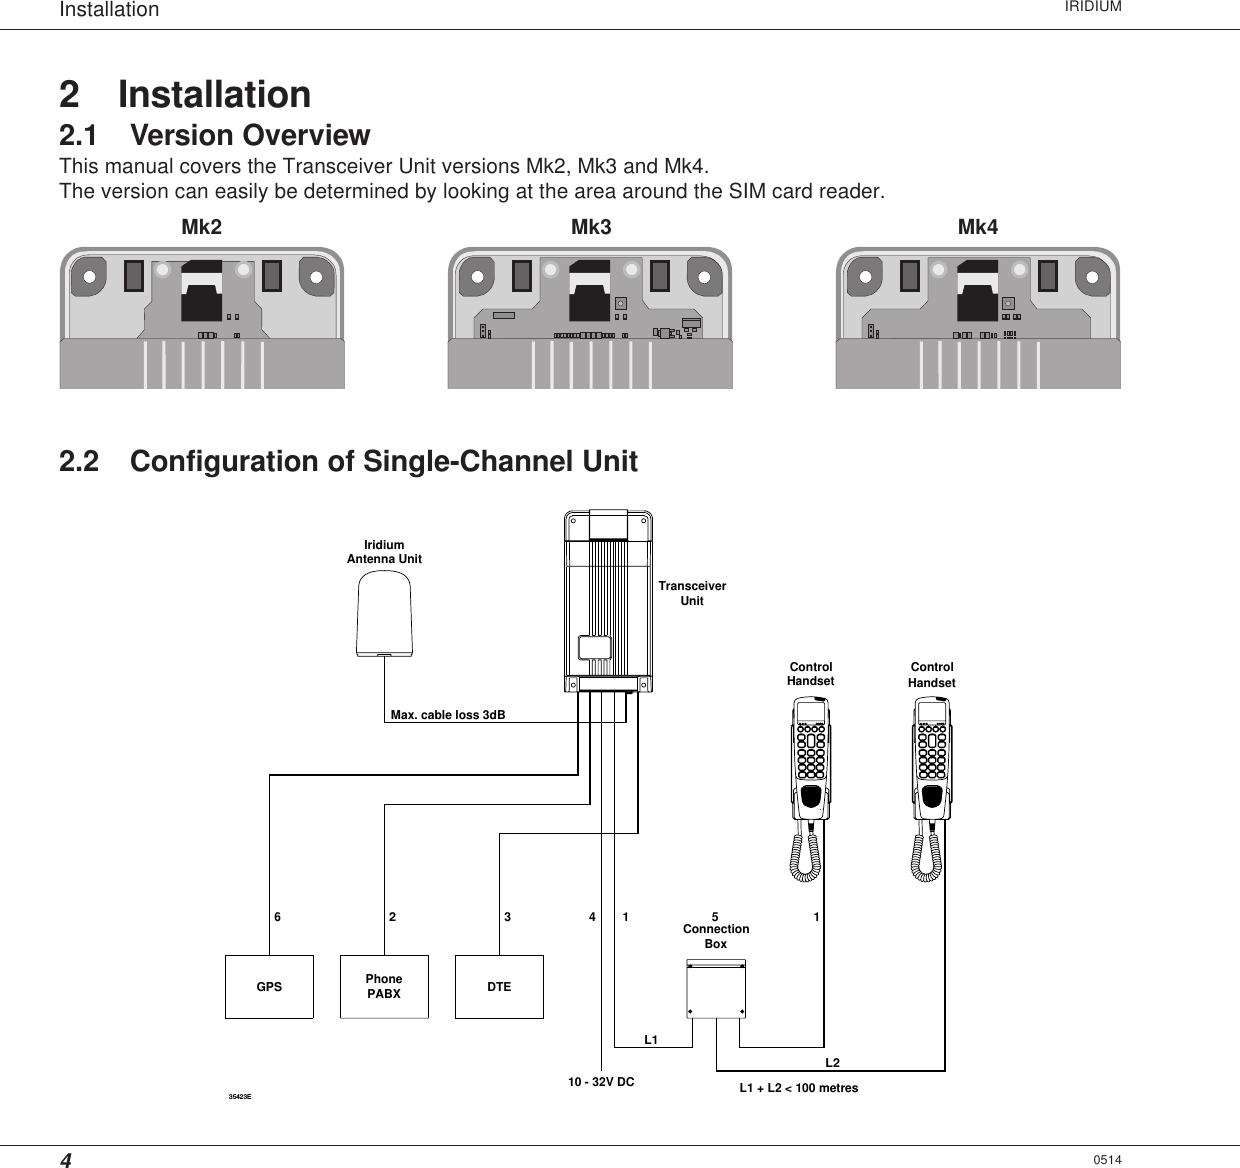 4Installation IRIDIUM05142 Installation2.1 Version OverviewThis manual covers the Transceiver Unit versions Mk2, Mk3 and Mk4.The version can easily be determined by looking at the area around the SIM card reader.2.2 Configuration of Single-Channel UnitL135423E10 - 32V DCPABXPhoneDTE2341Antenna UnitMax. cable loss 3dBIridiumL1 + L2 &lt; 100 metresL2BoxConnection51HandsetControlHandsetTransceiverUnitControl6GPSMk2 Mk3 Mk4